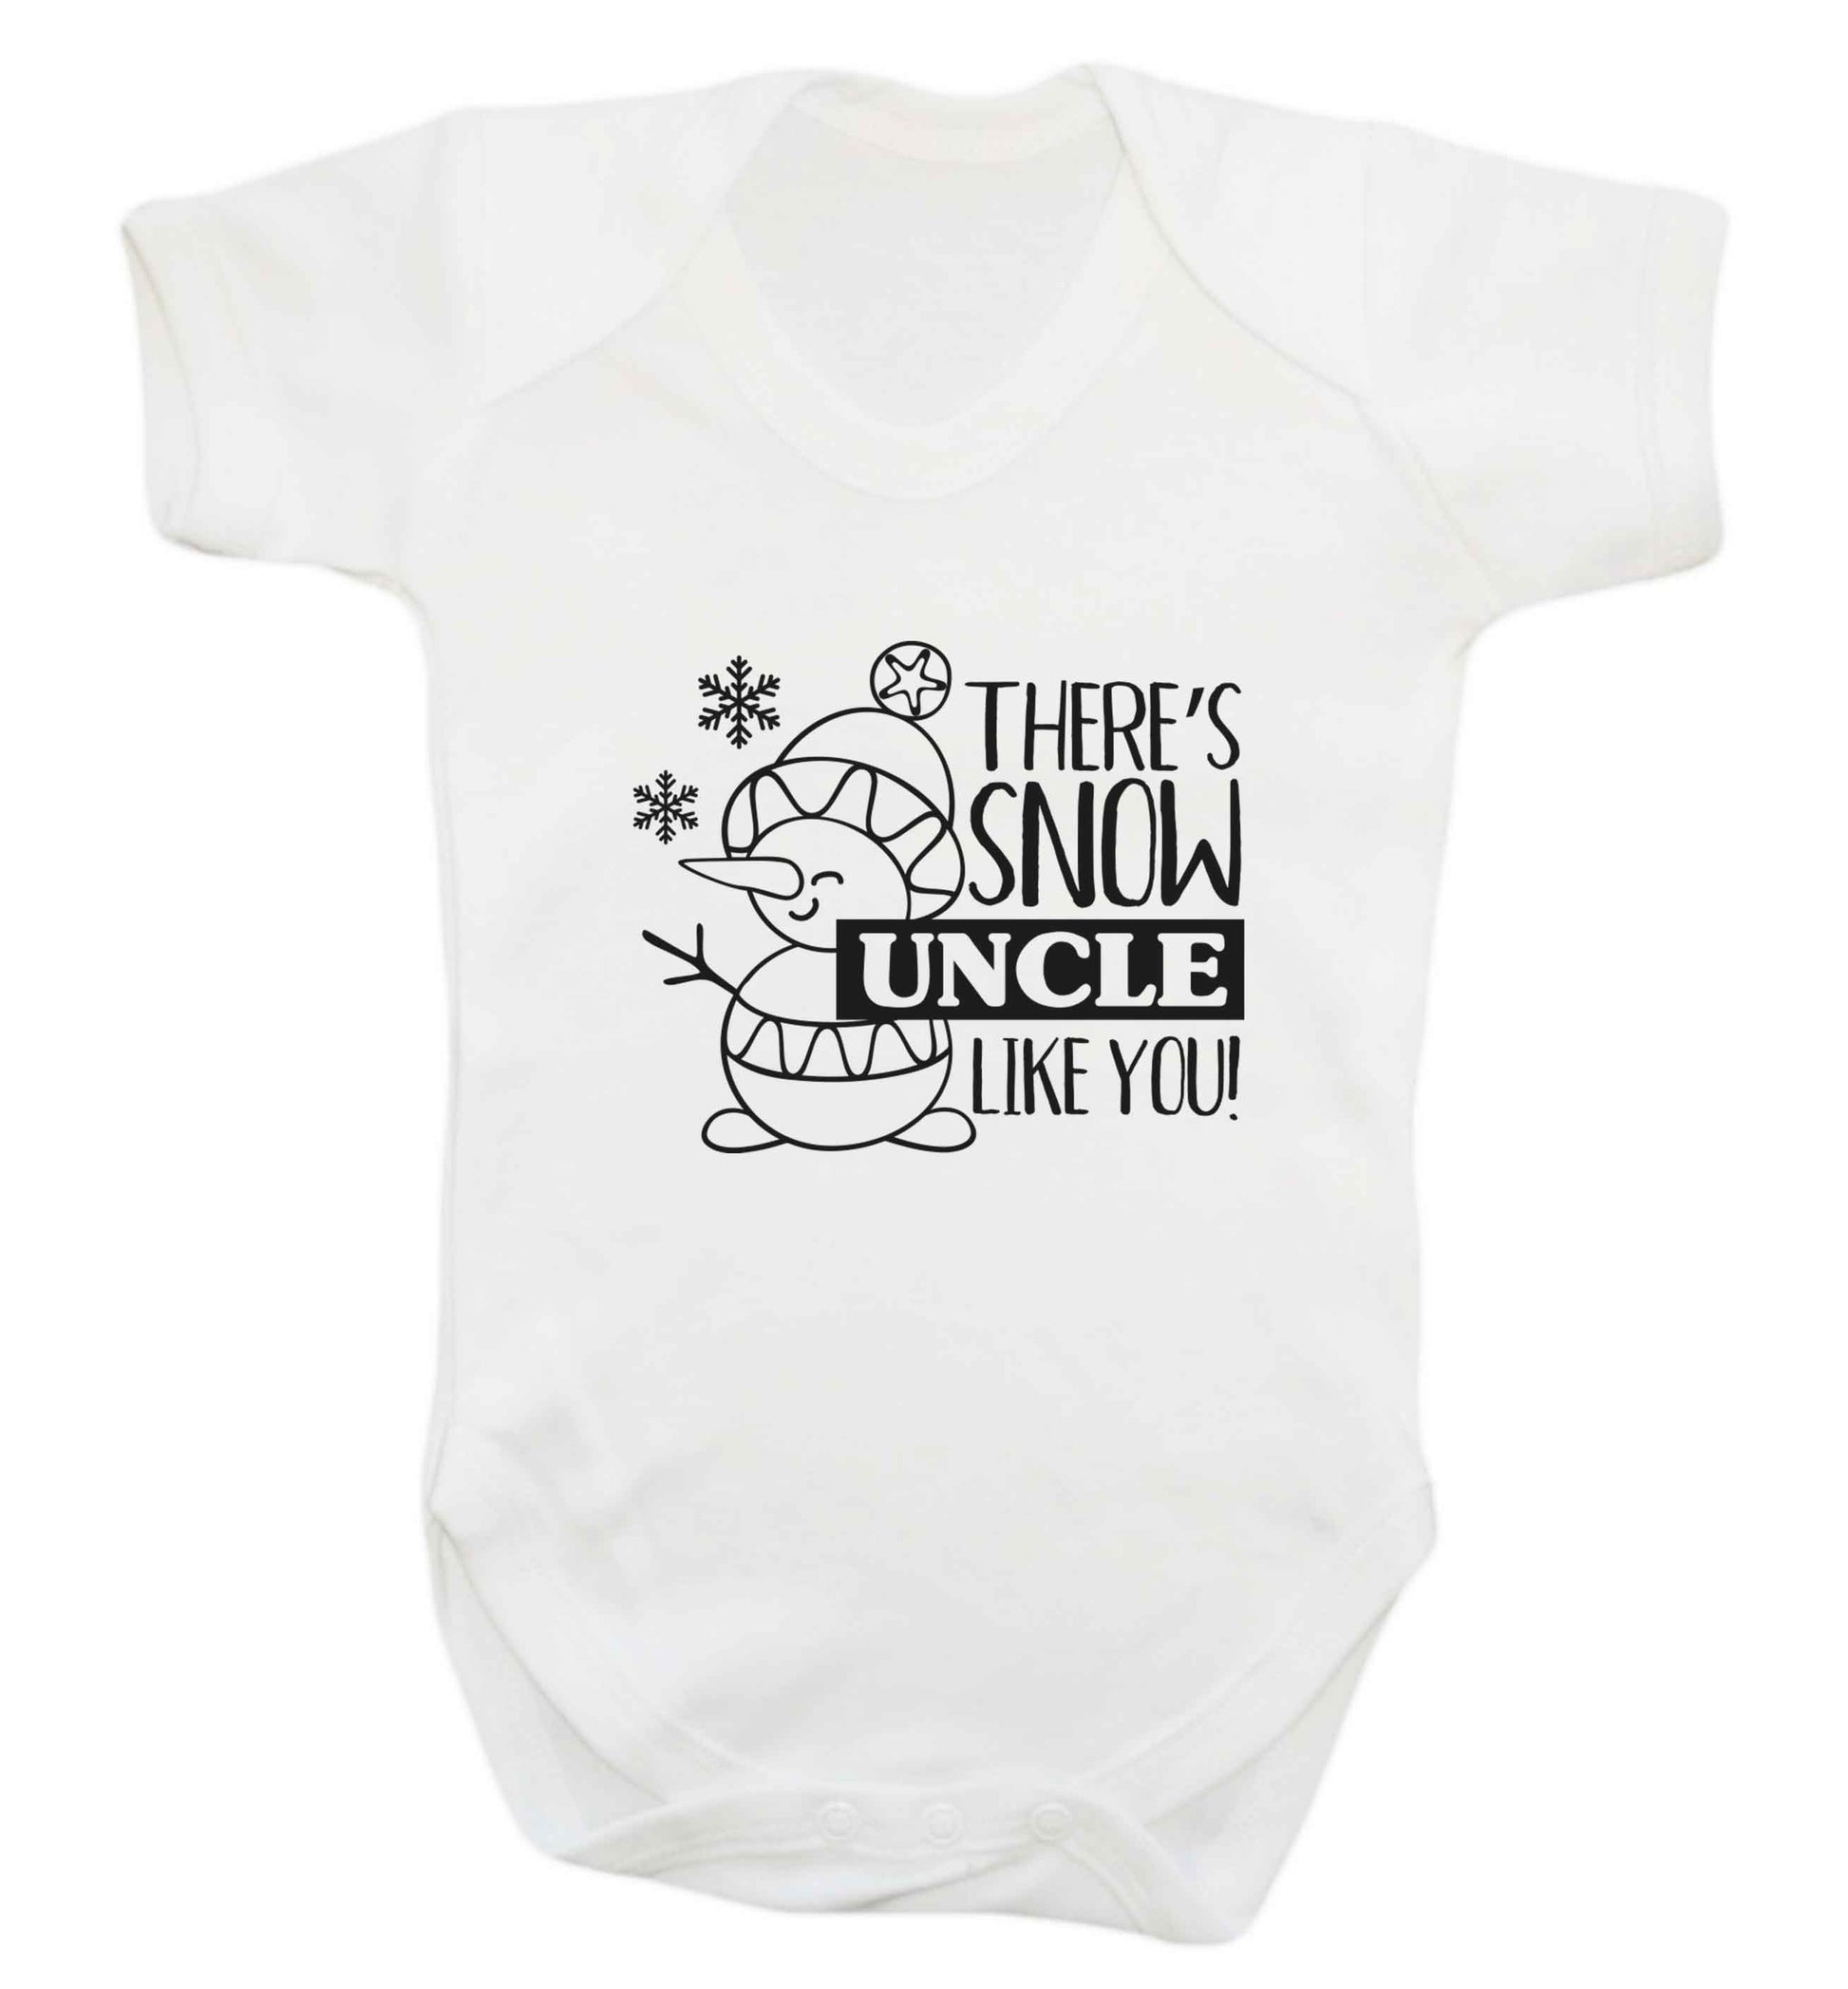 There's snow uncle like you baby vest white 18-24 months